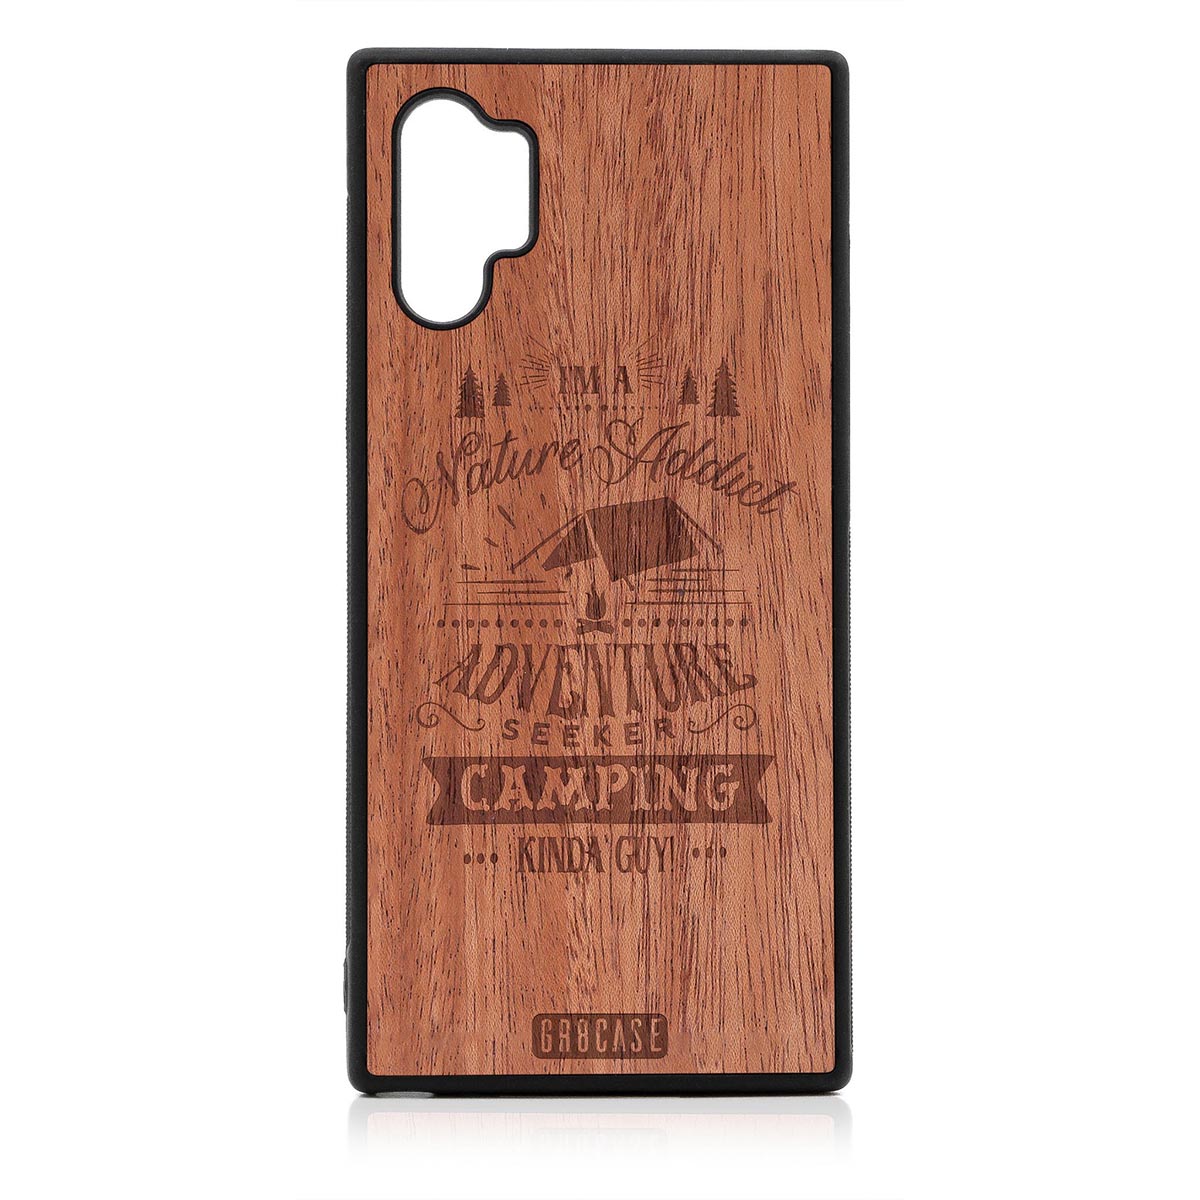 I'm A Nature Addict Adventure Seeker Camping Kinda Guy Design Wood Case Samsung Galaxy Note 10 Plus by GR8CASE